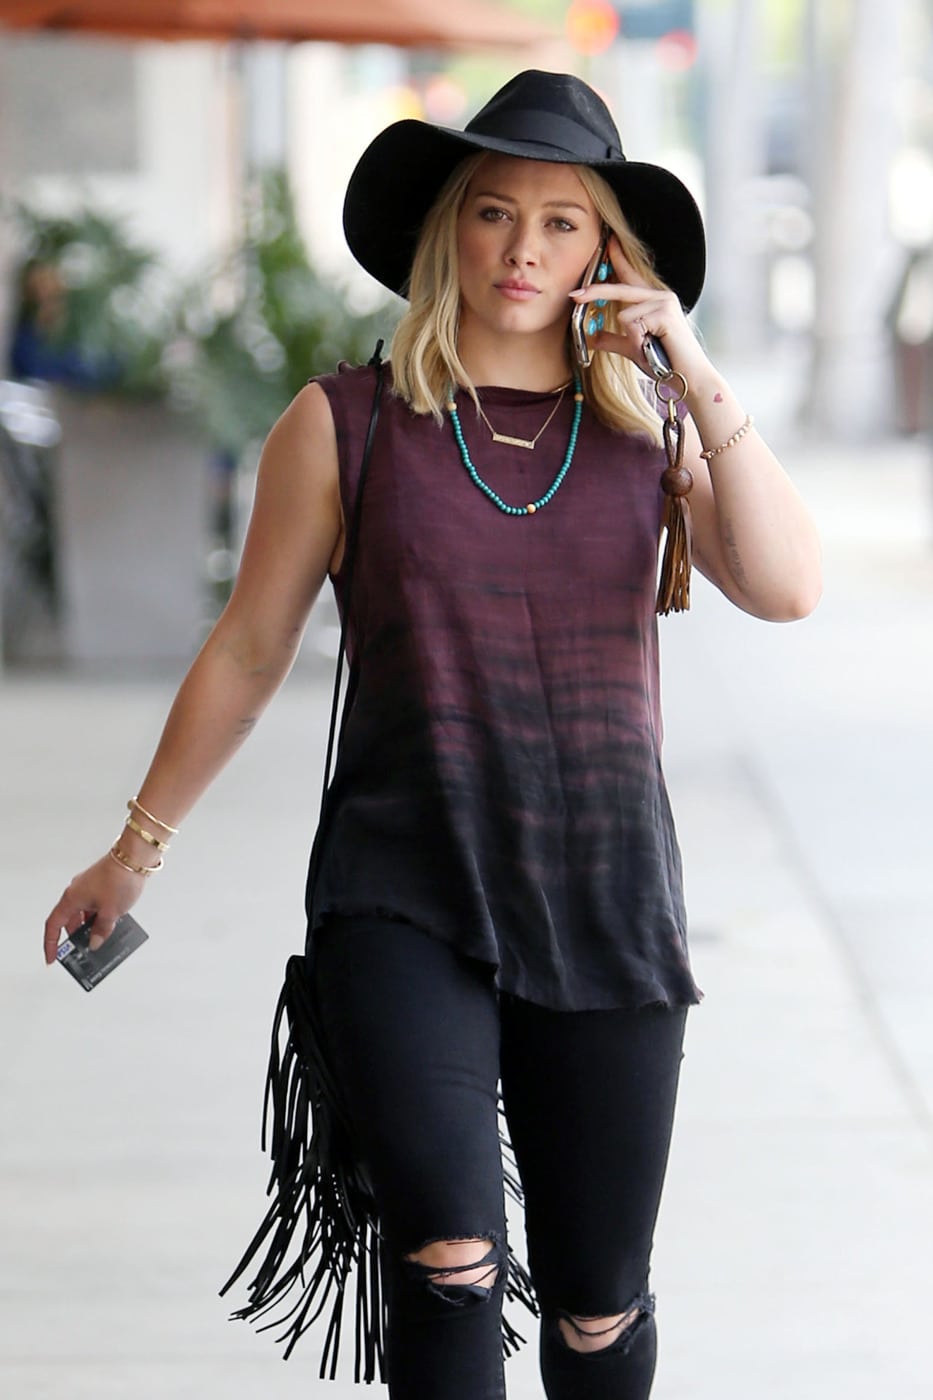 Pin on HILARY DUFF FASHION STYLE OUTFITS